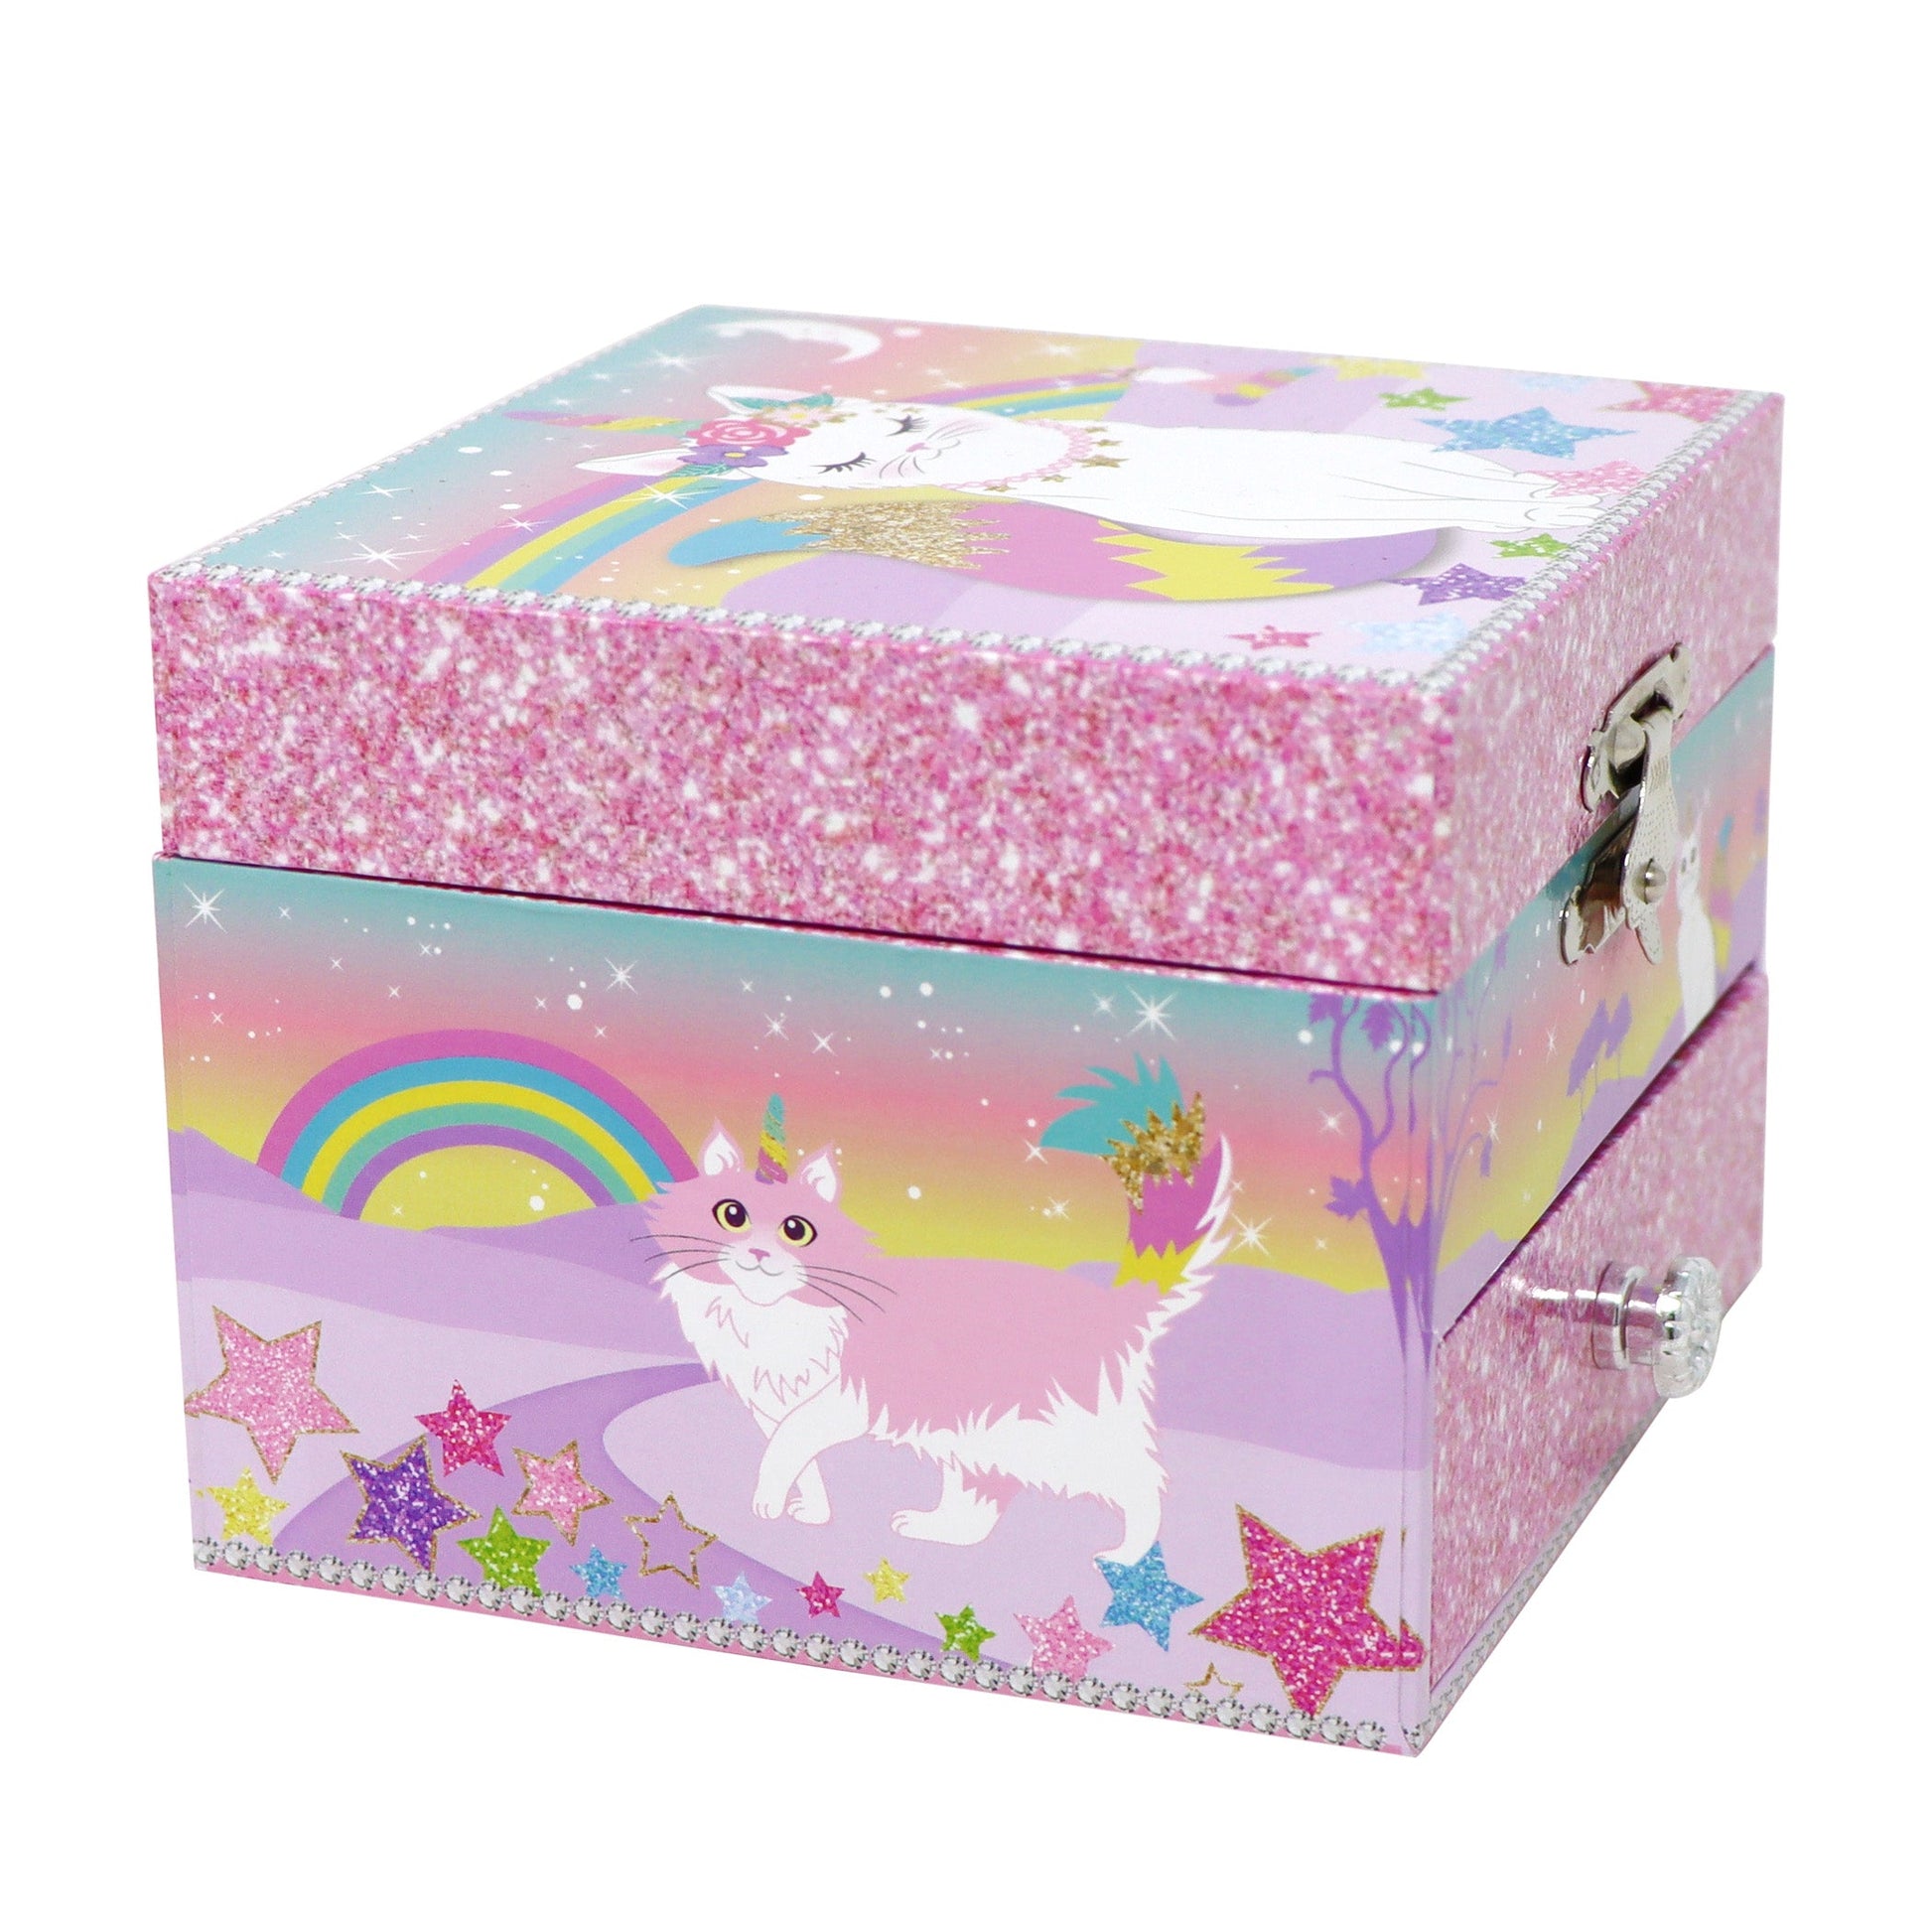 Pink Poppy Caticorn Dreams Small Musical Jewellery Box The Toy Wagon